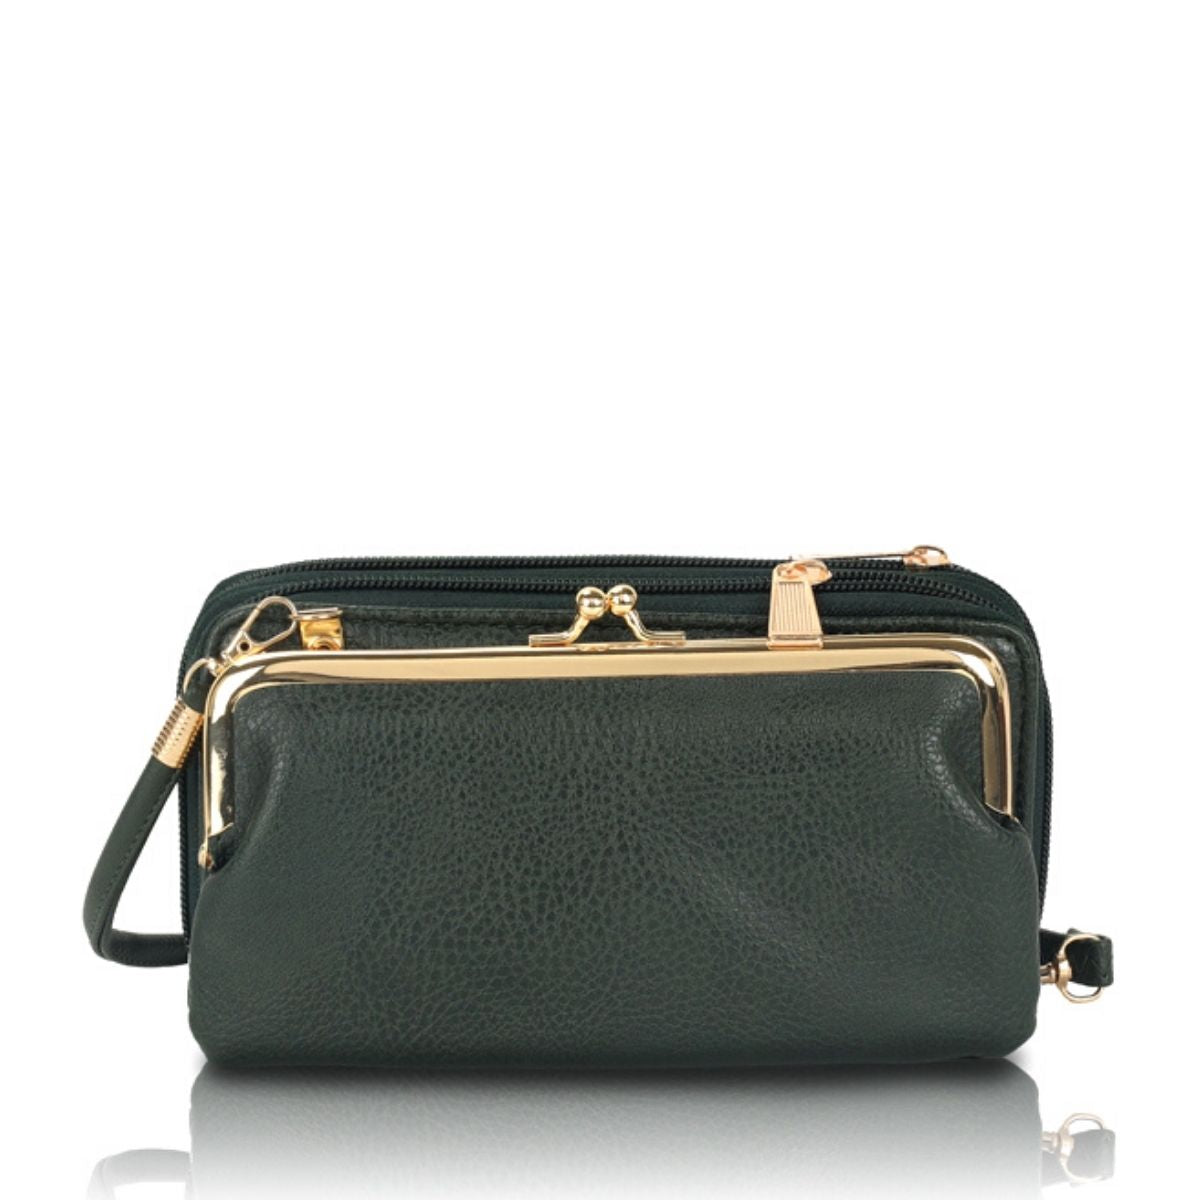 Olive Coin Purse Wallet Crossbody